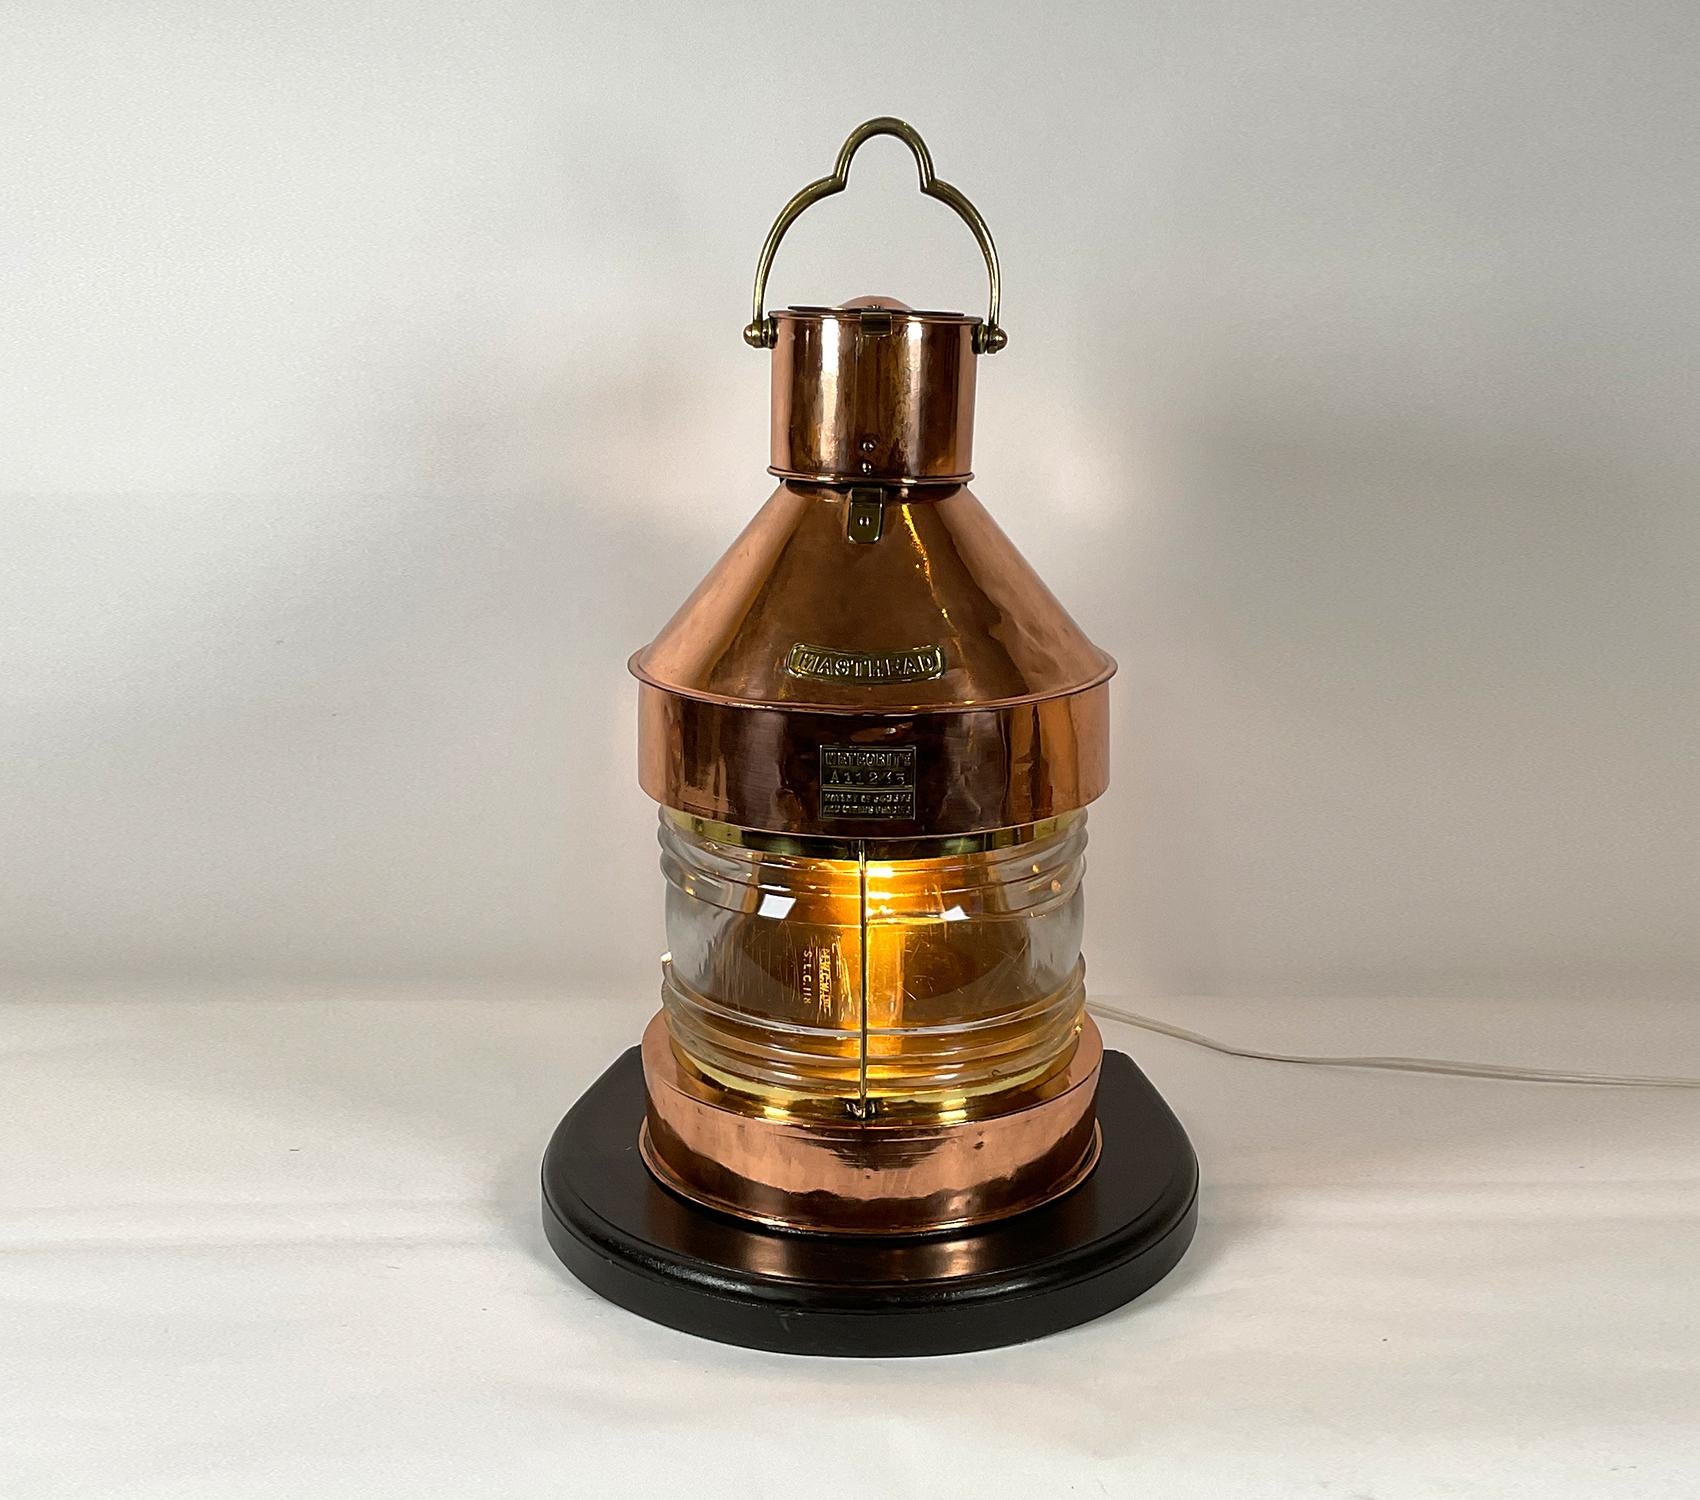 Copper ship’s masthead lantern by English maker “Meteorite”. Brass maker’s badge with serial number A11235. Also fitted with an embossed brass “masthead” badge. Mounted to a thick wood base and wired with an electric socket. Meticulously polished